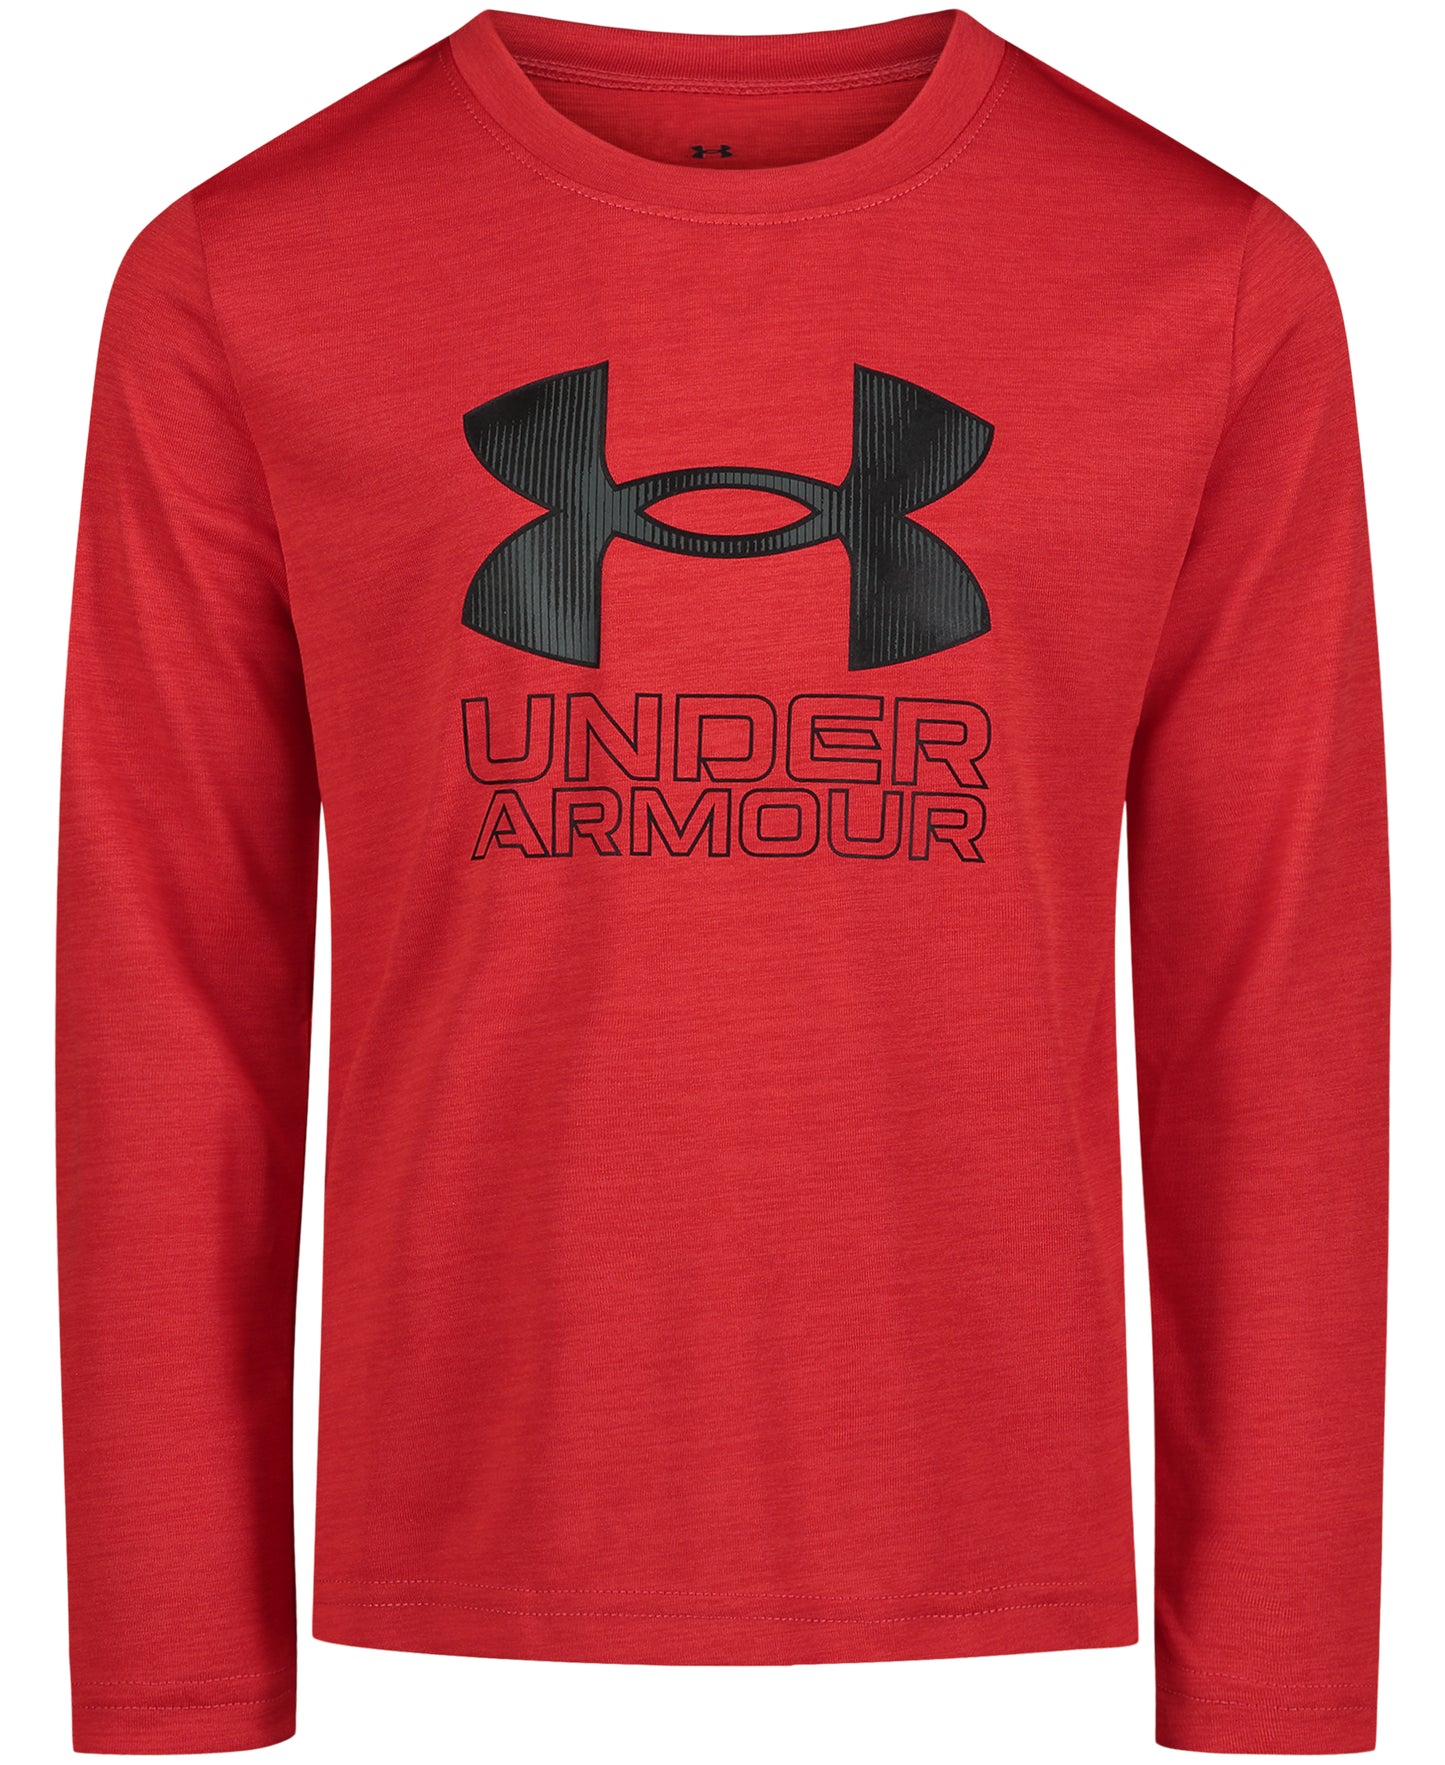 Chandail rouge - Under Armour